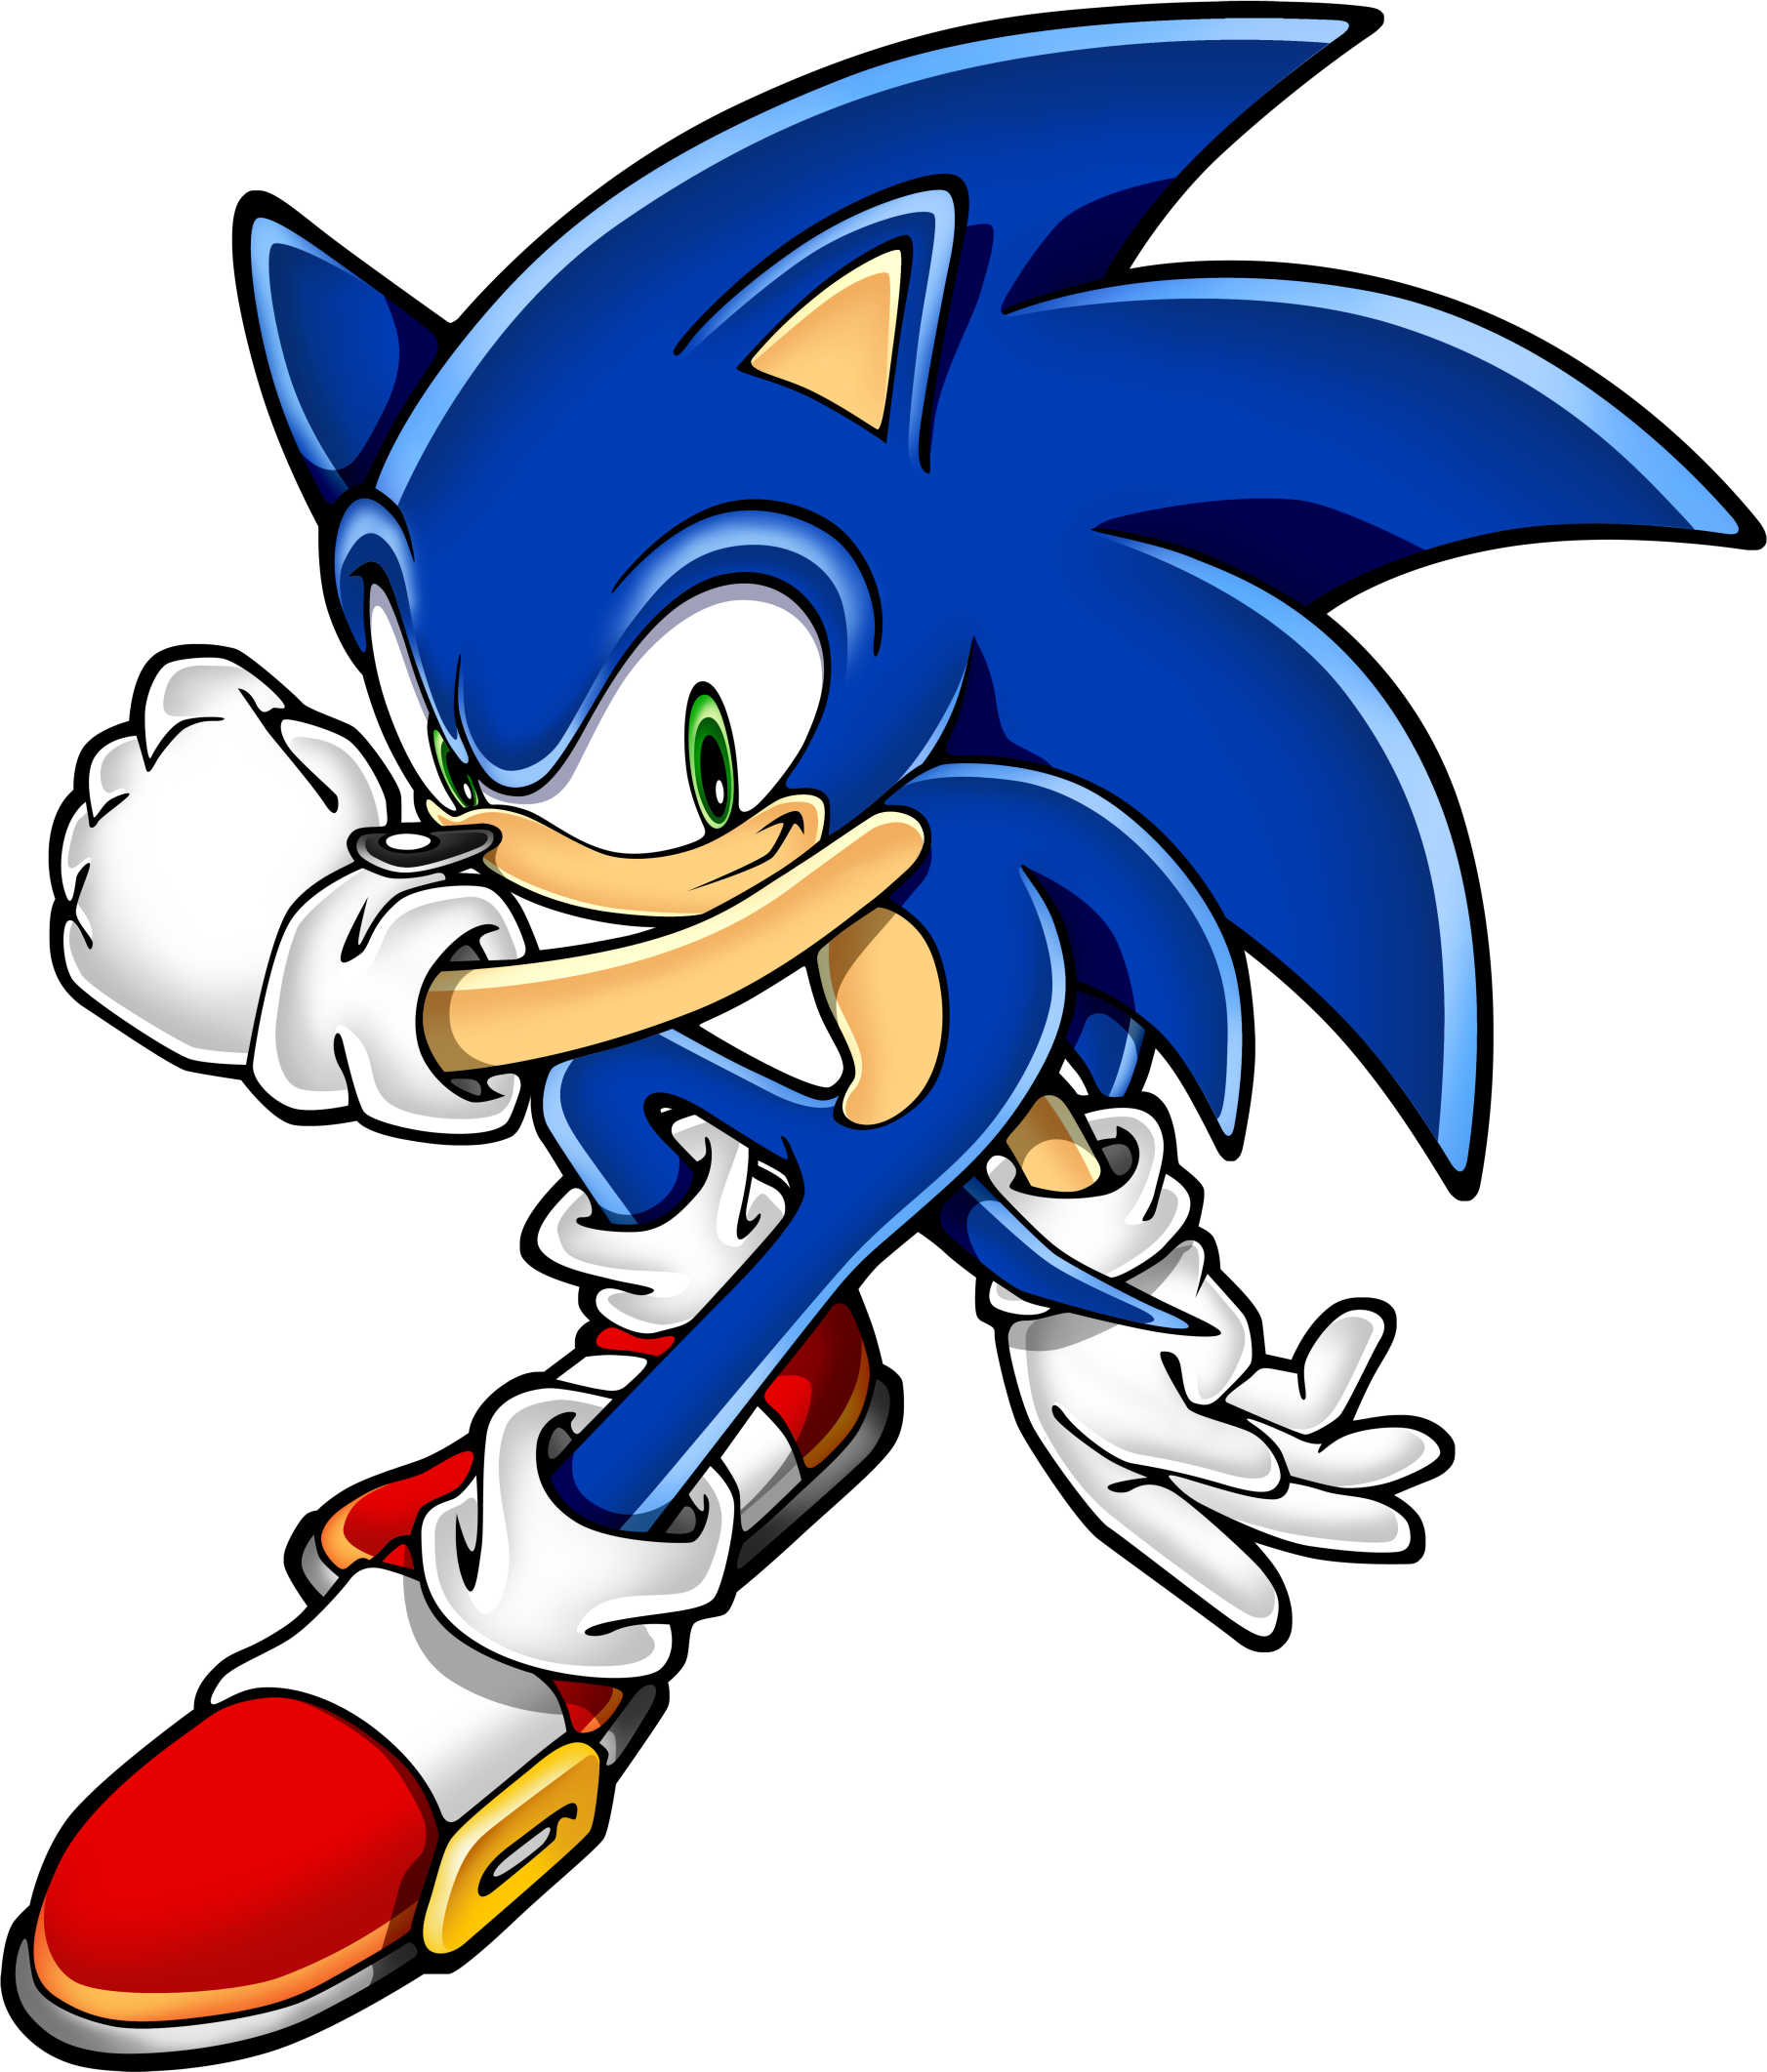 sonic the hedgehog clipart free - photo #20